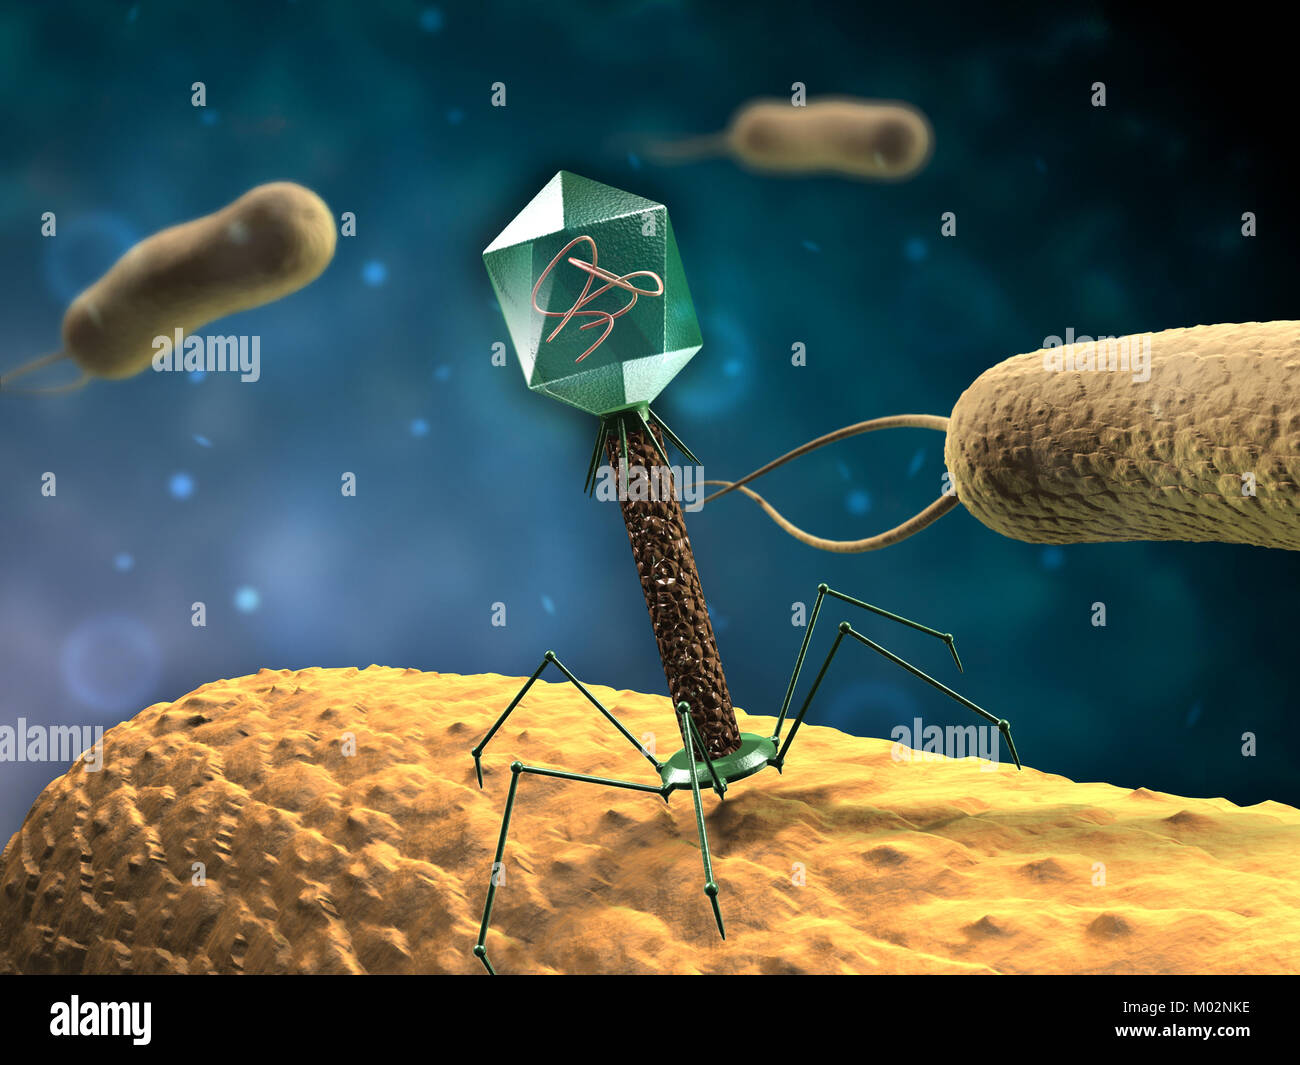 Bacteriophage T4 infecting some bacteria. Digital illustration. Stock Photo